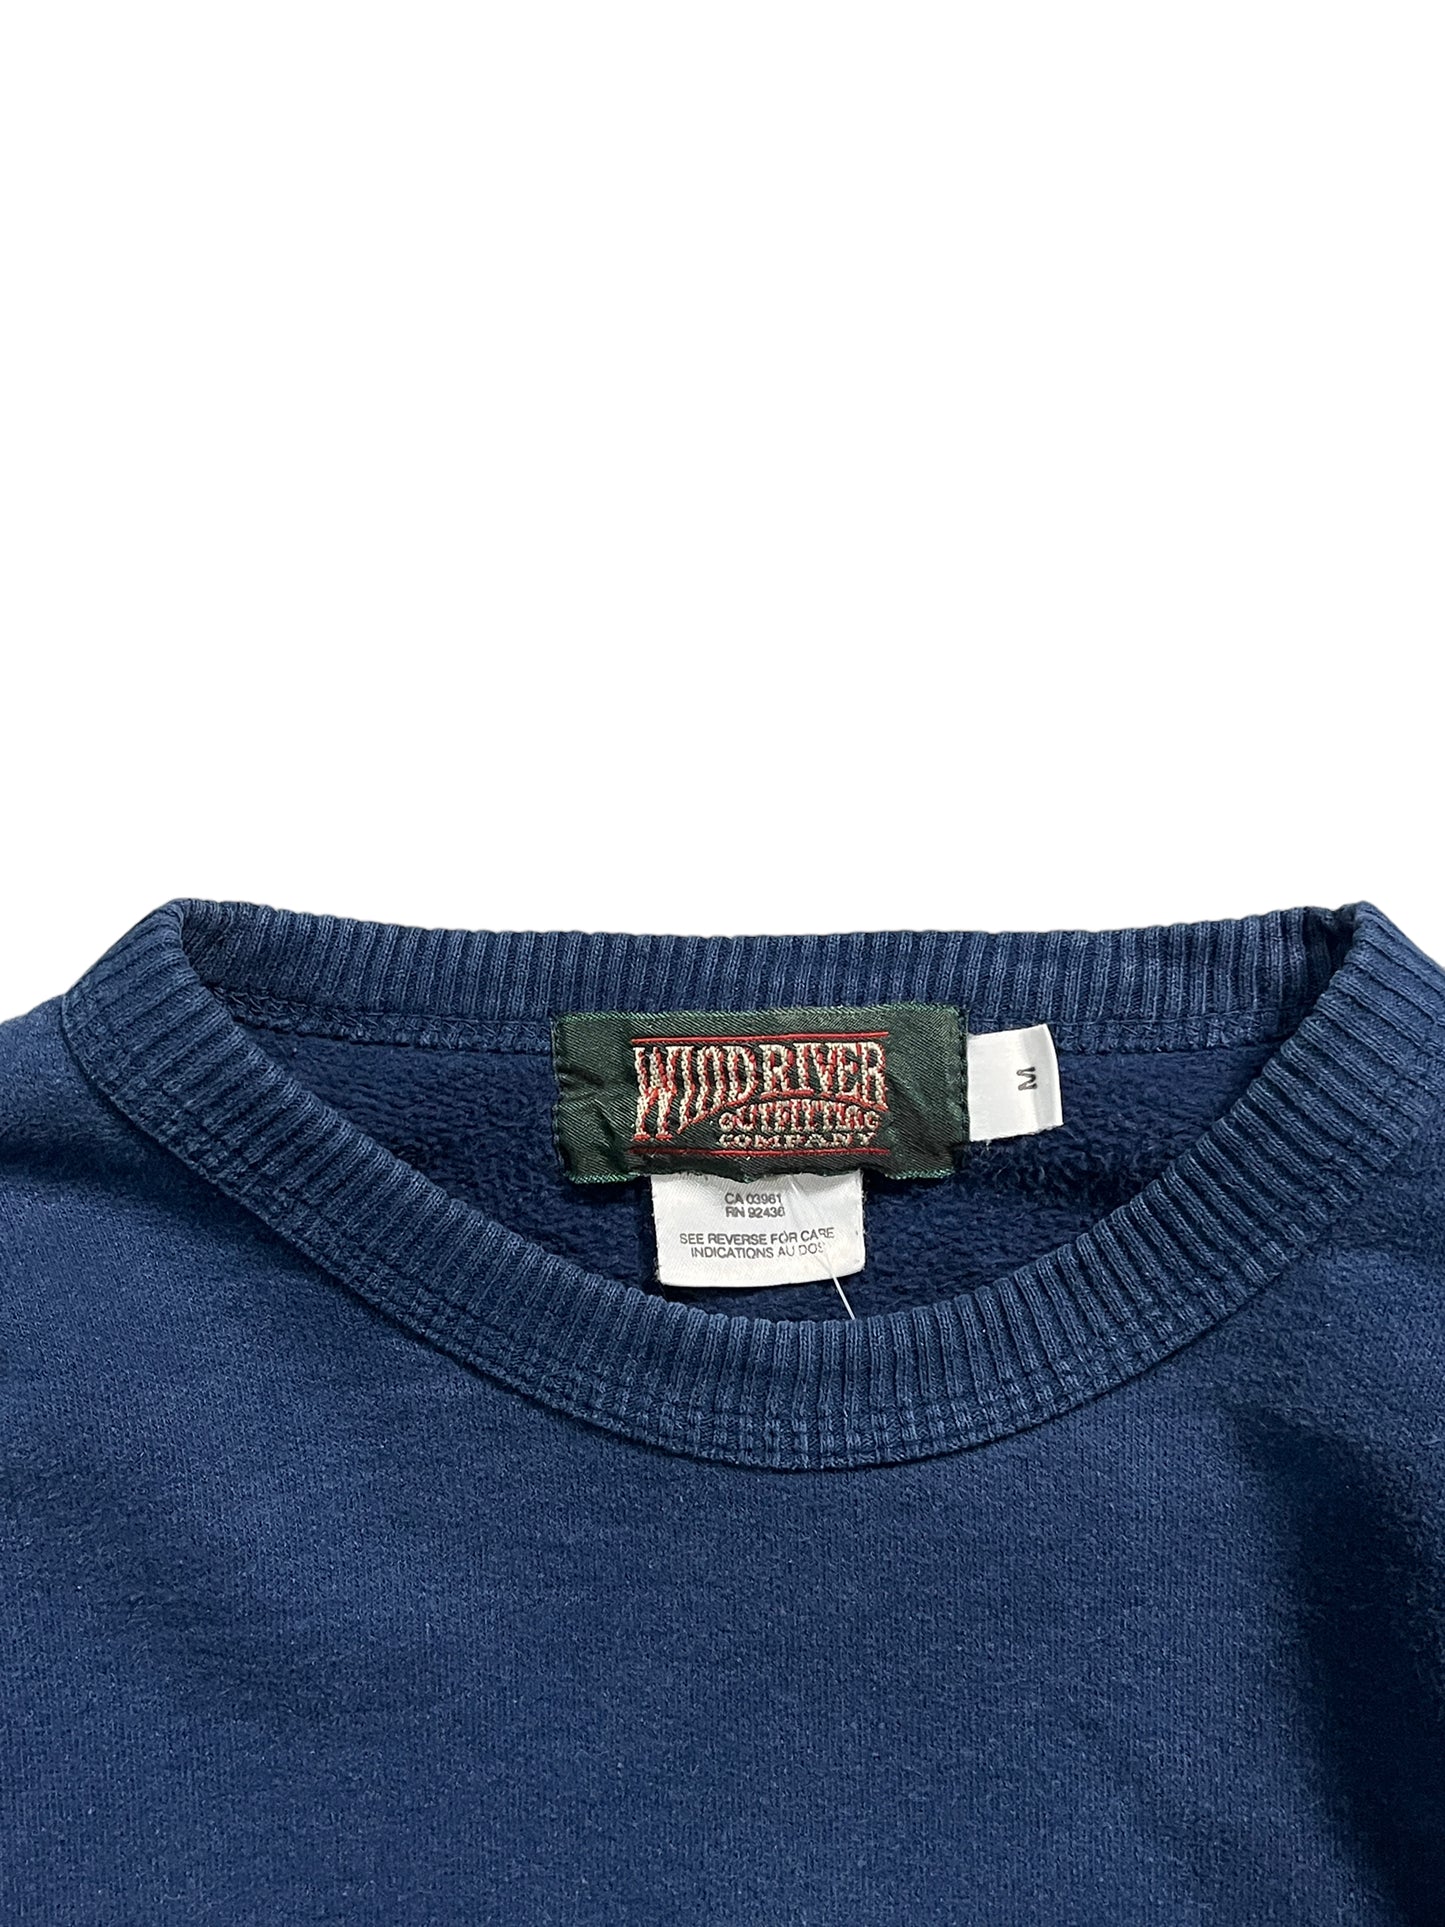 Vintage Windriver Sweater